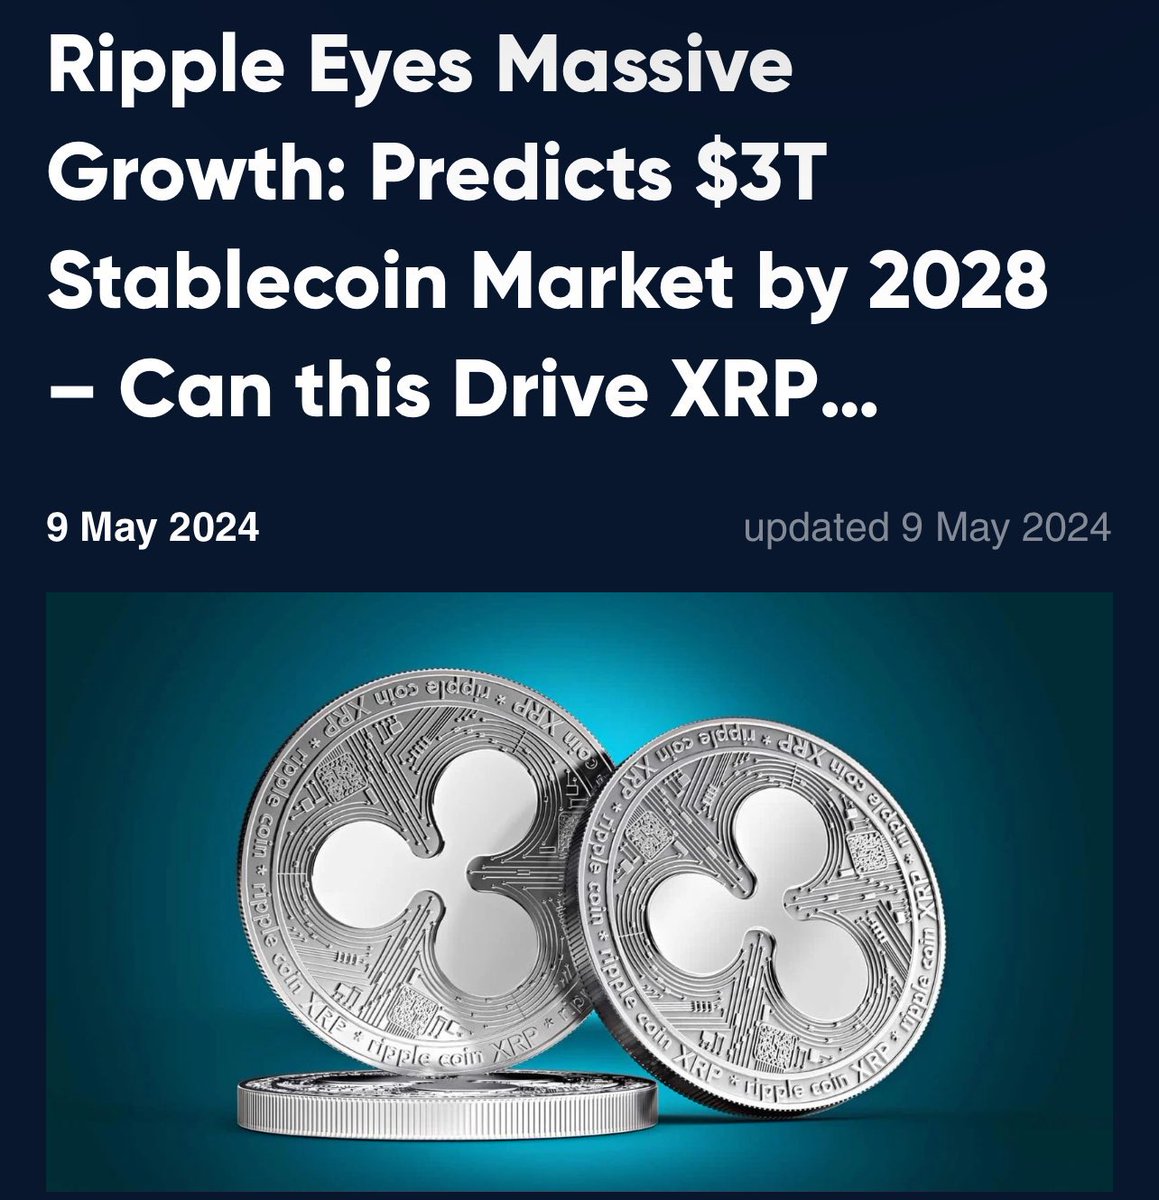 Ripple Stablecoin to Capture Part of $3 Trillion Market by 2028! #XRP could reach above $62.75 as a result! 

Top DeFi token on XRPL, CTF token looks primed for jump from $0.95 to $374.25 per token with a tiny portion of that supply!

With a supply of ONLY 120 million tokens, the…